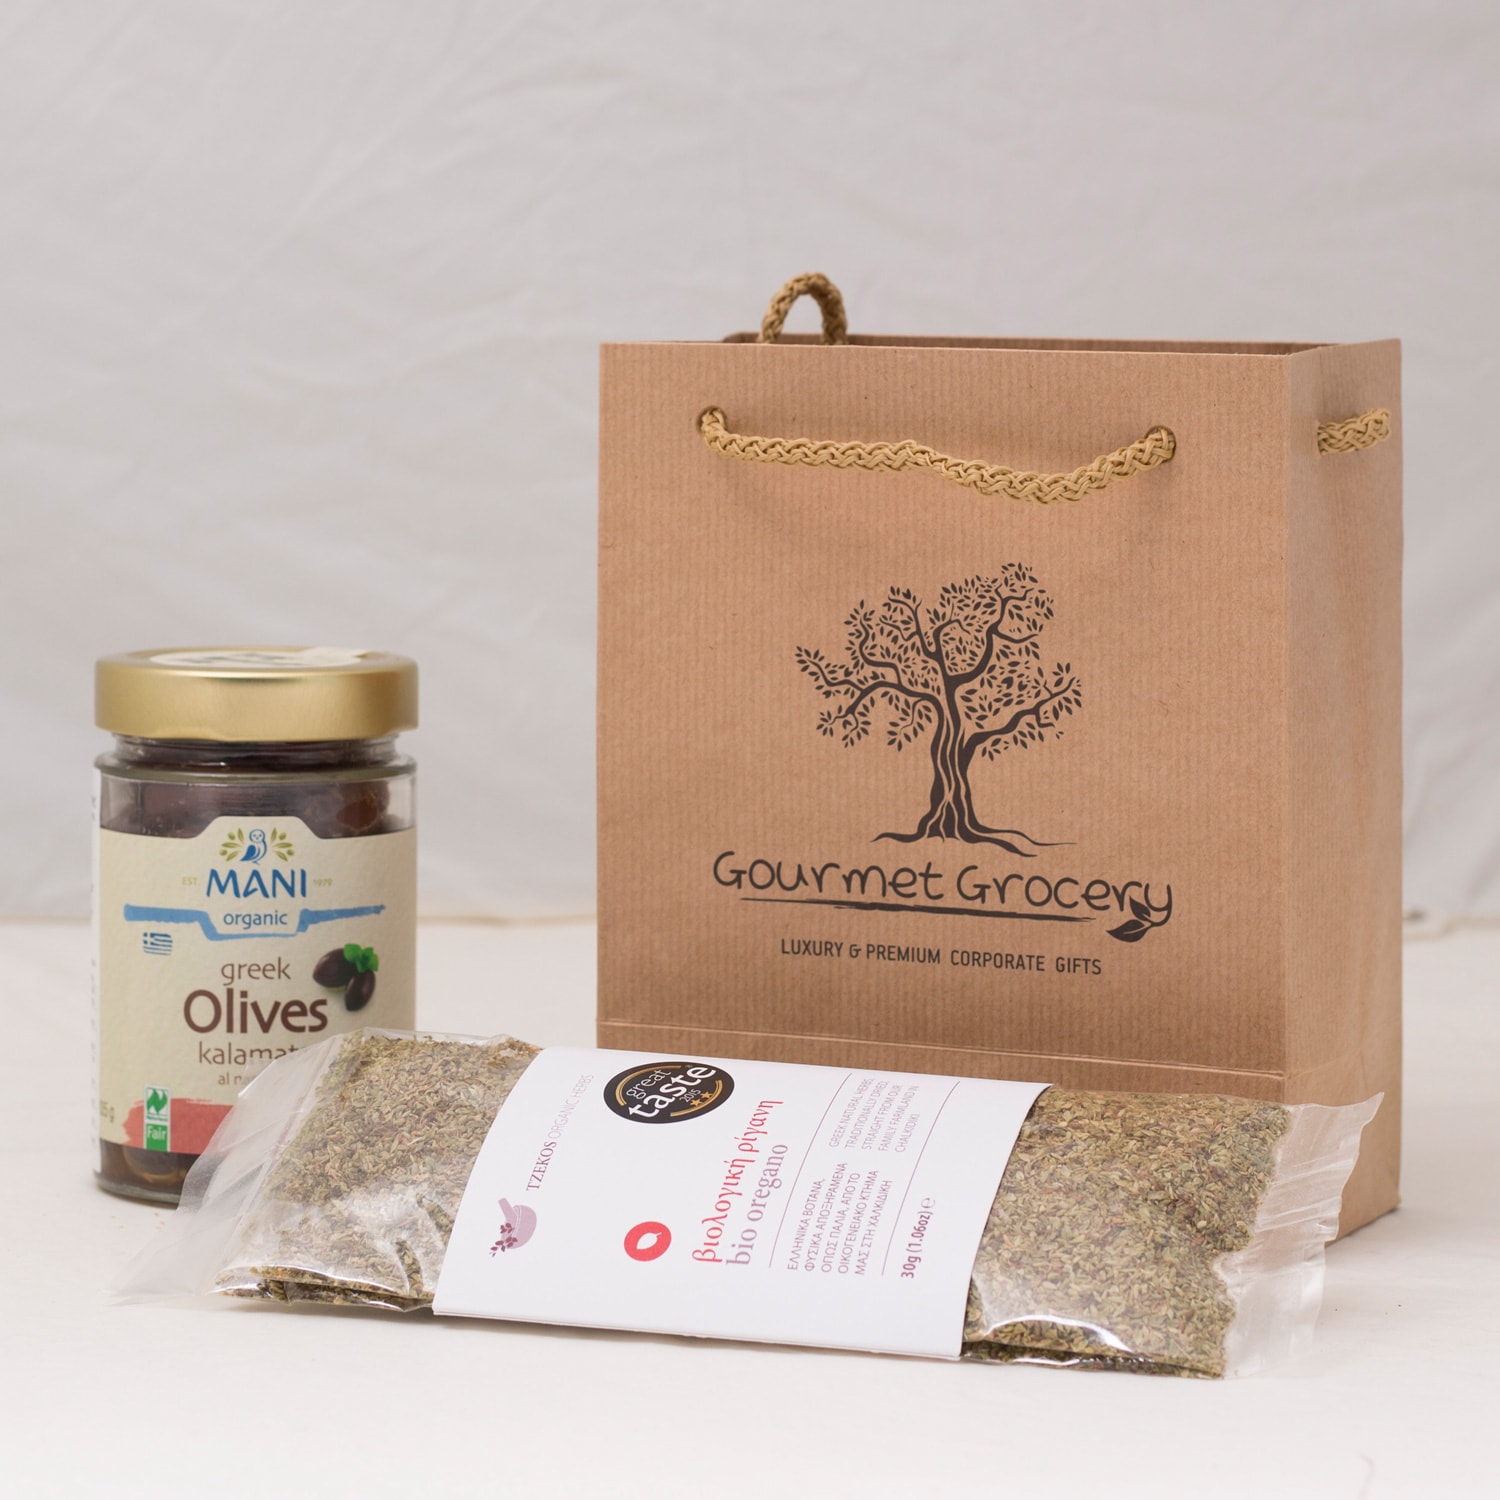 Olives and Oregano in Gift Bag [organic